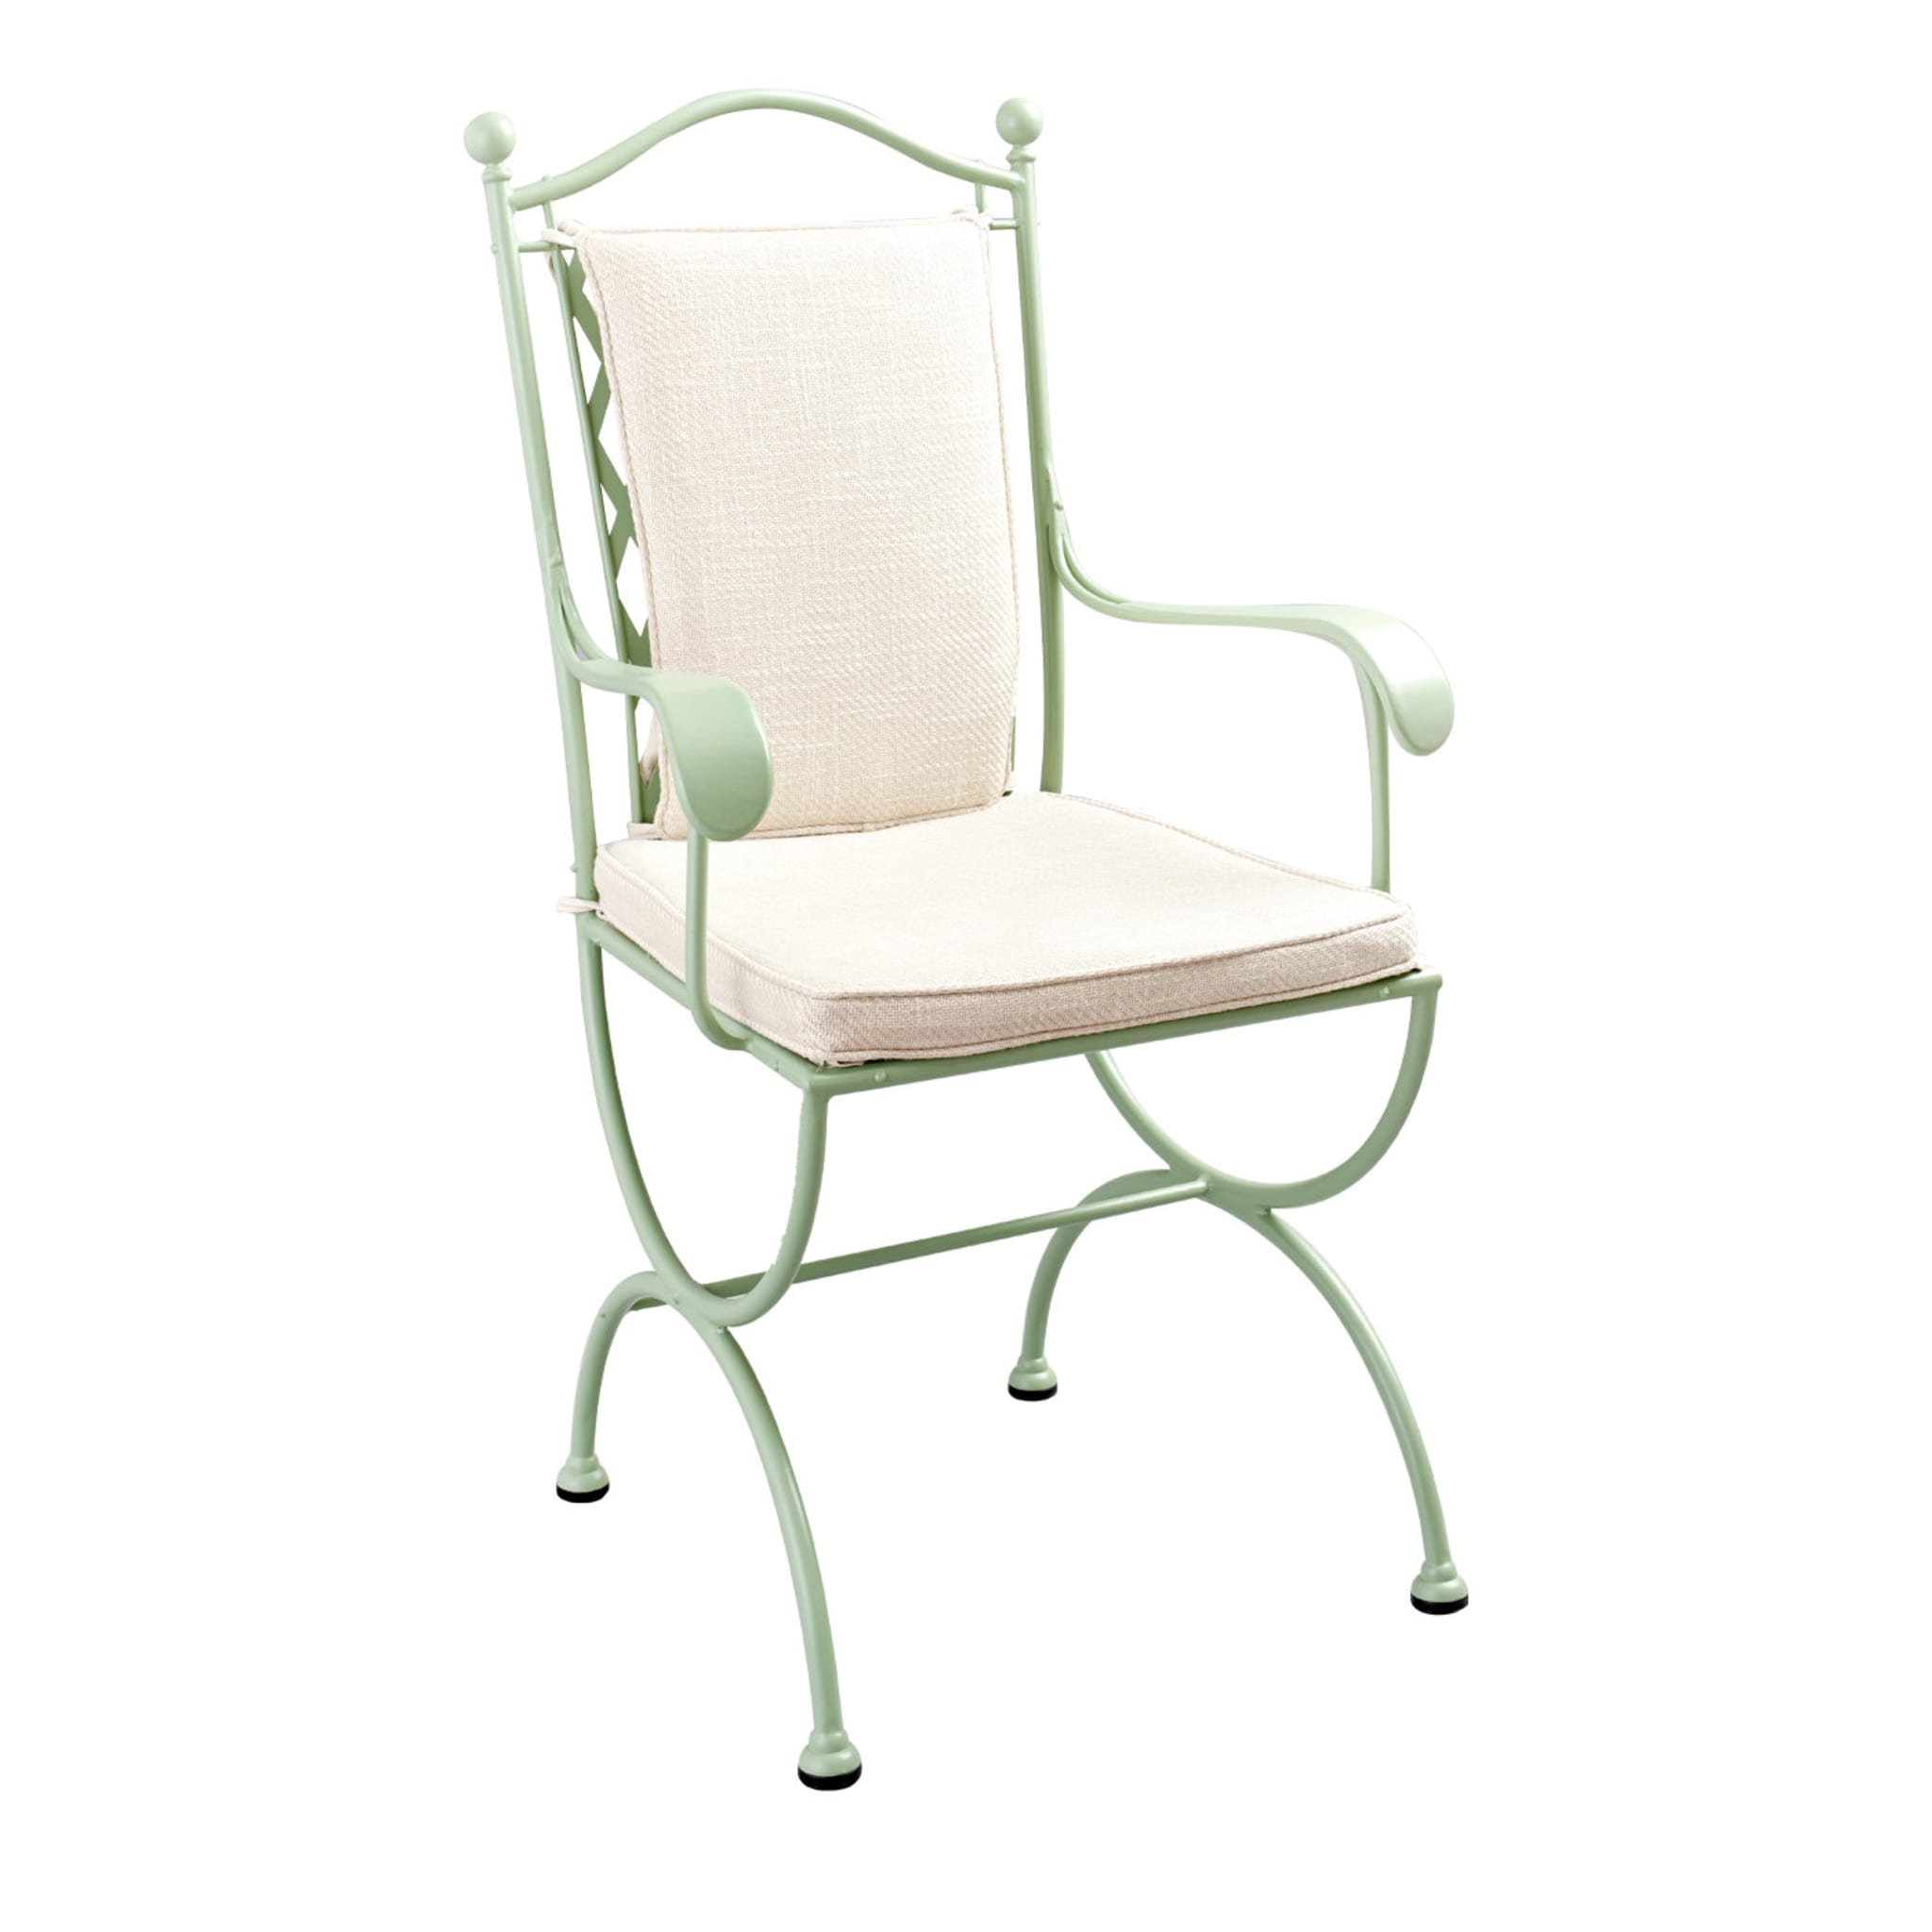 Rombi Outdoor Green Stainless Steel Chair with Armrests - Main view